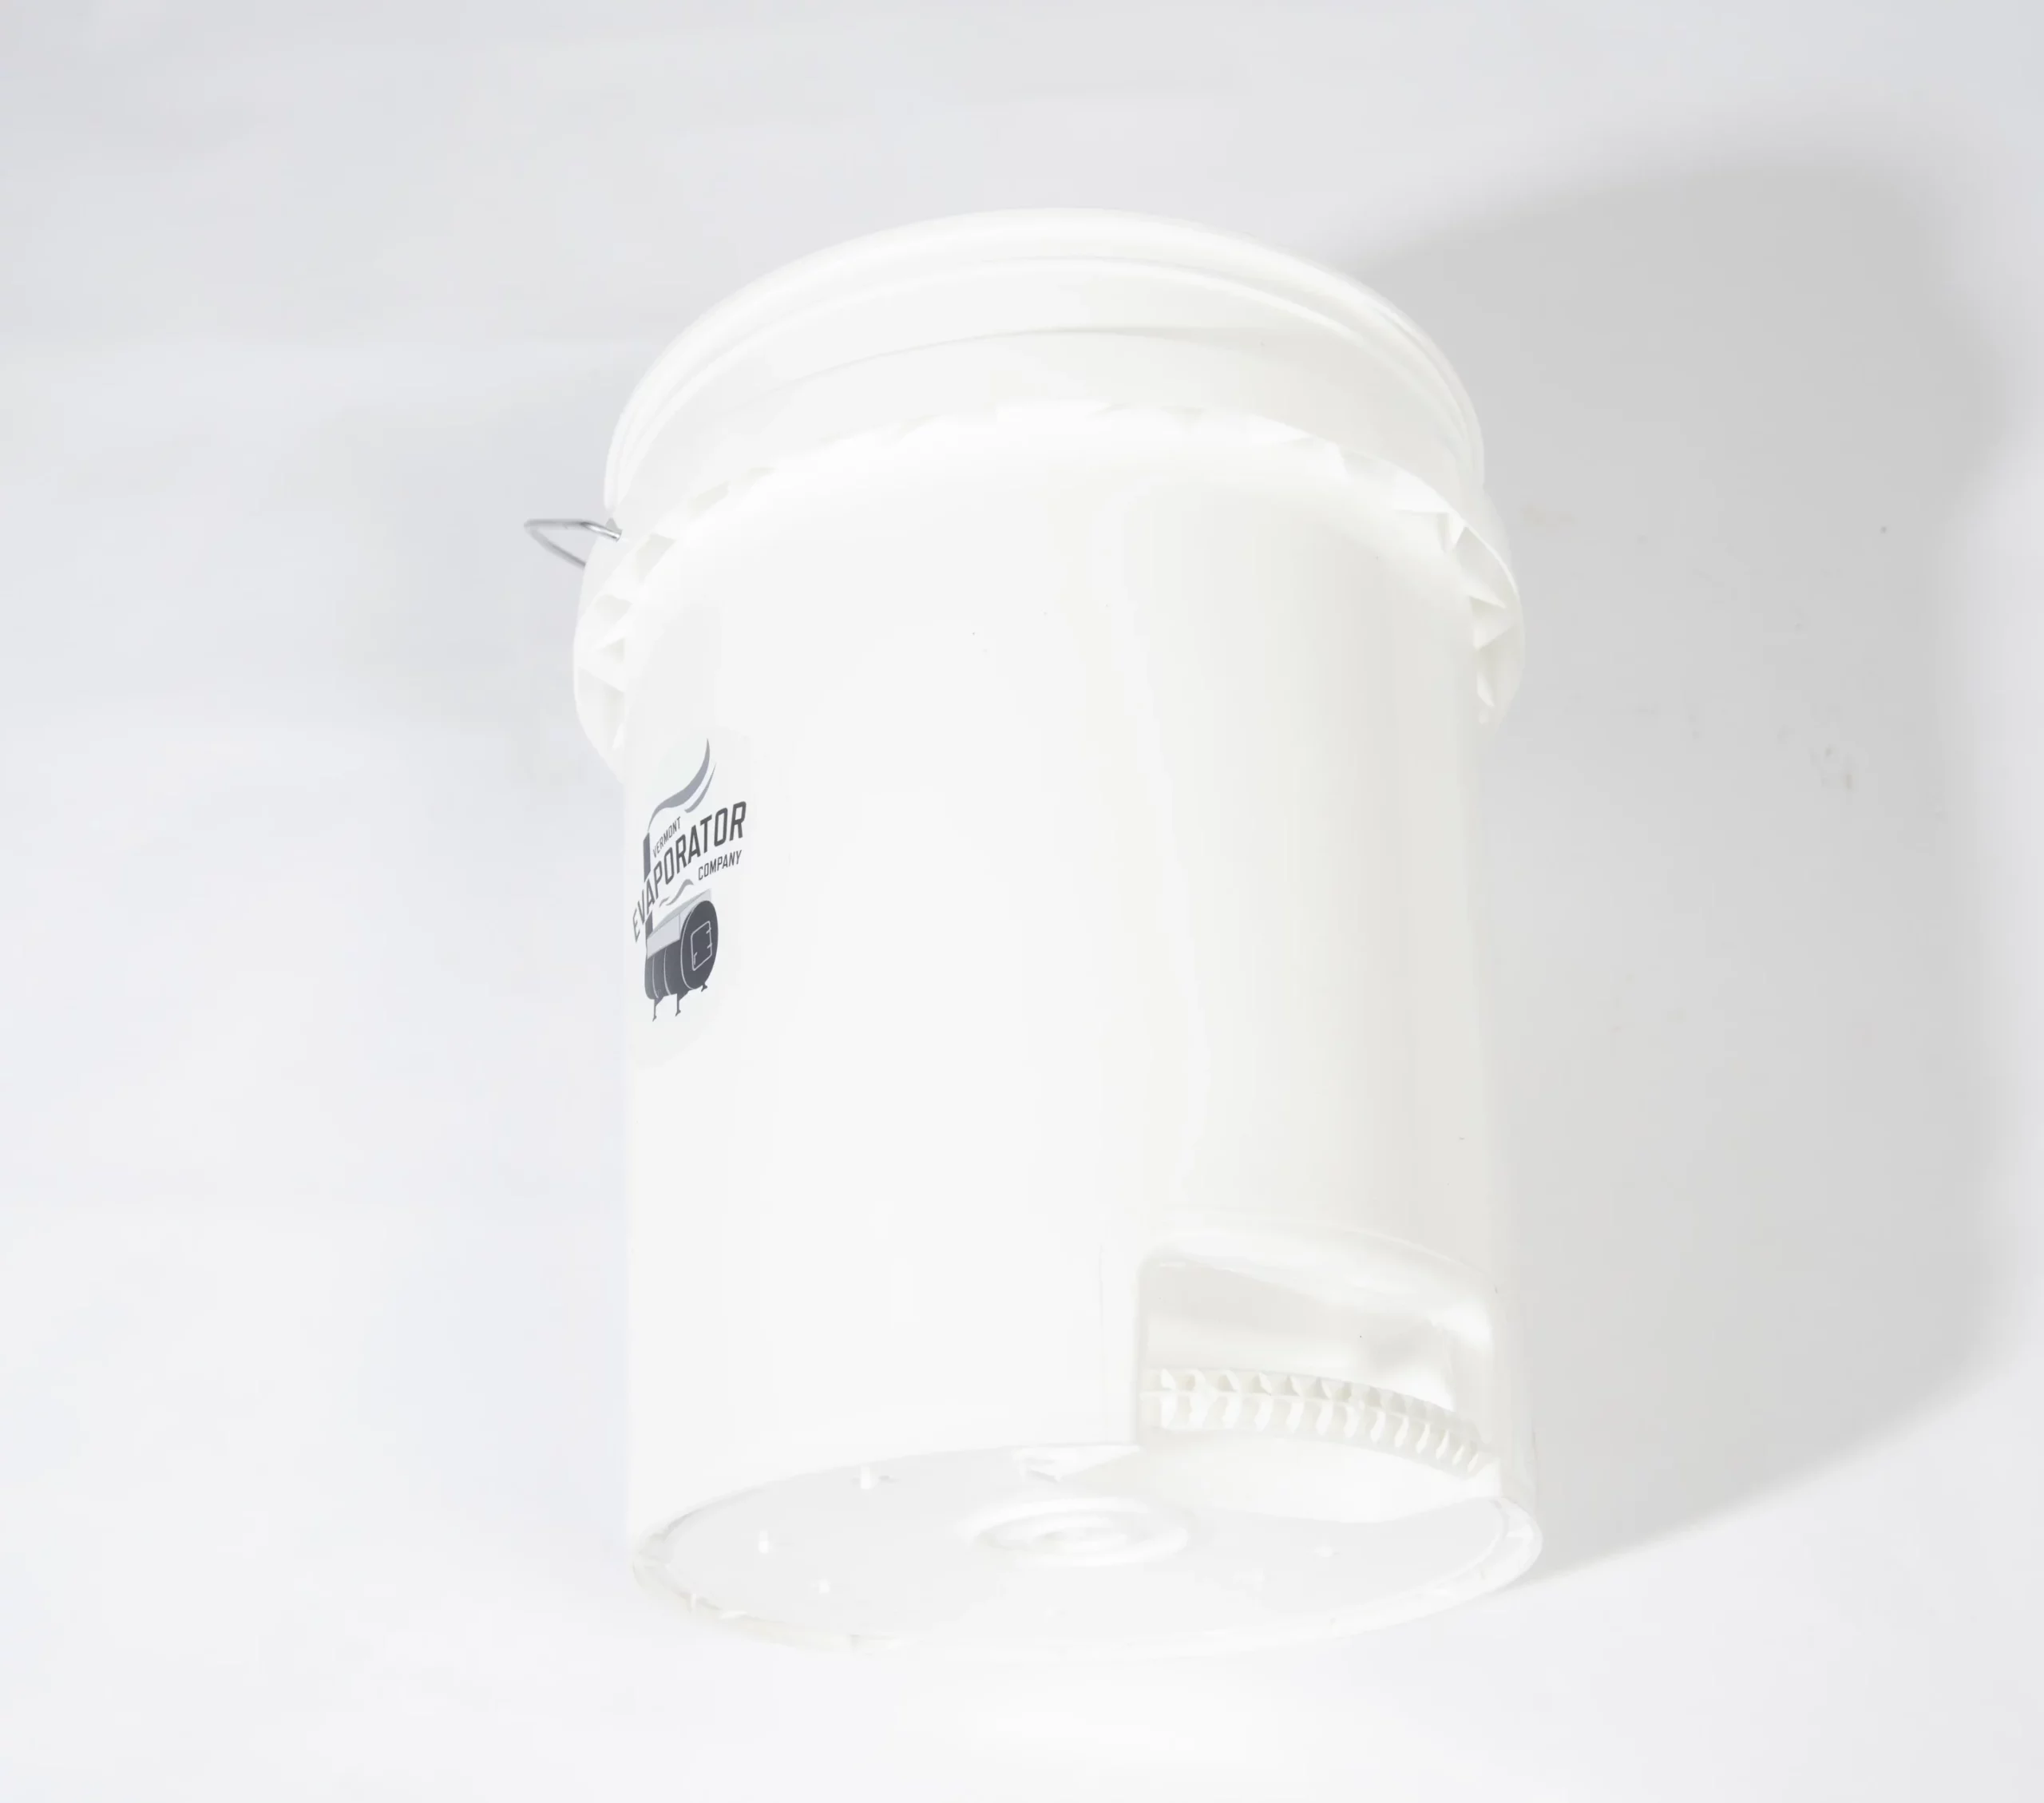 Built-in Bottom Handle 5 Gallon Buckets & Covers